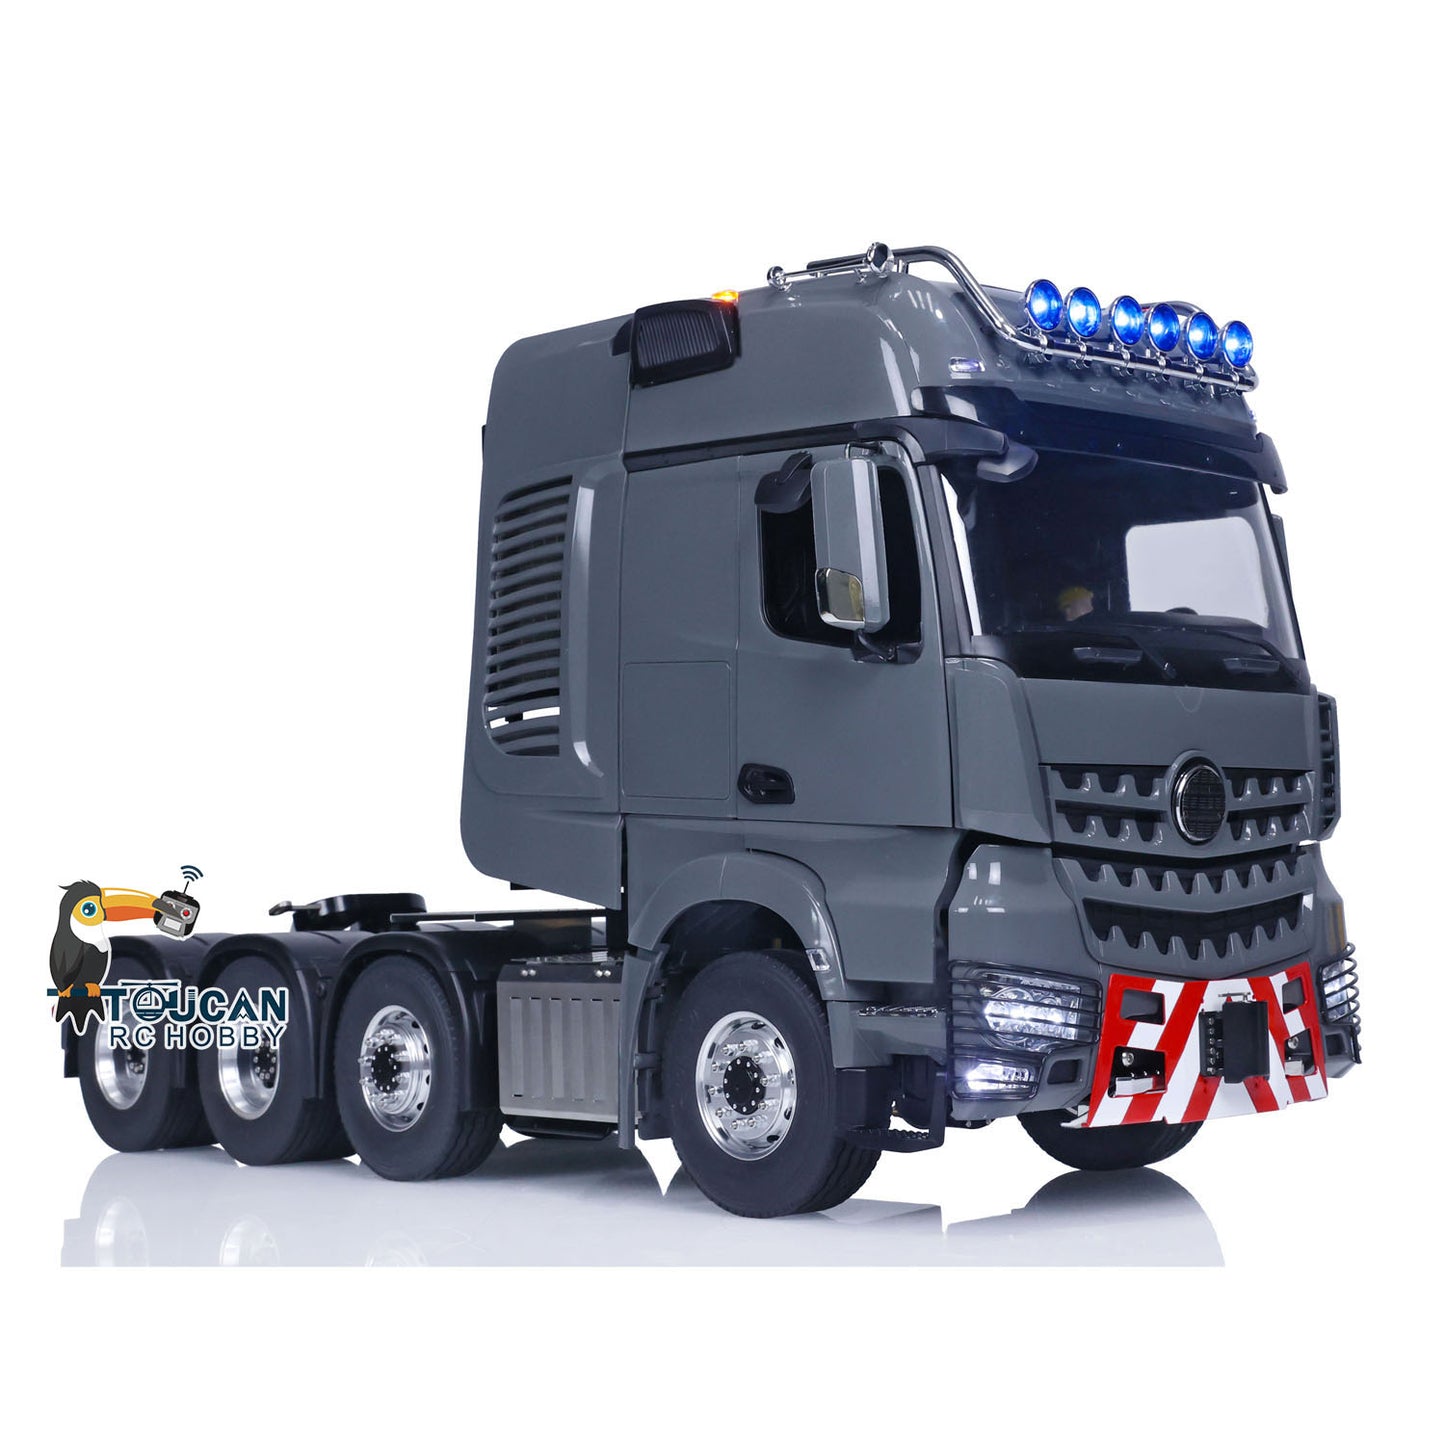 LESU 1:14 RC Tractor Truck Remote Controlled Car Painted Assembled Metal Chassis Hobby Model 1851 3363 Optional Versions